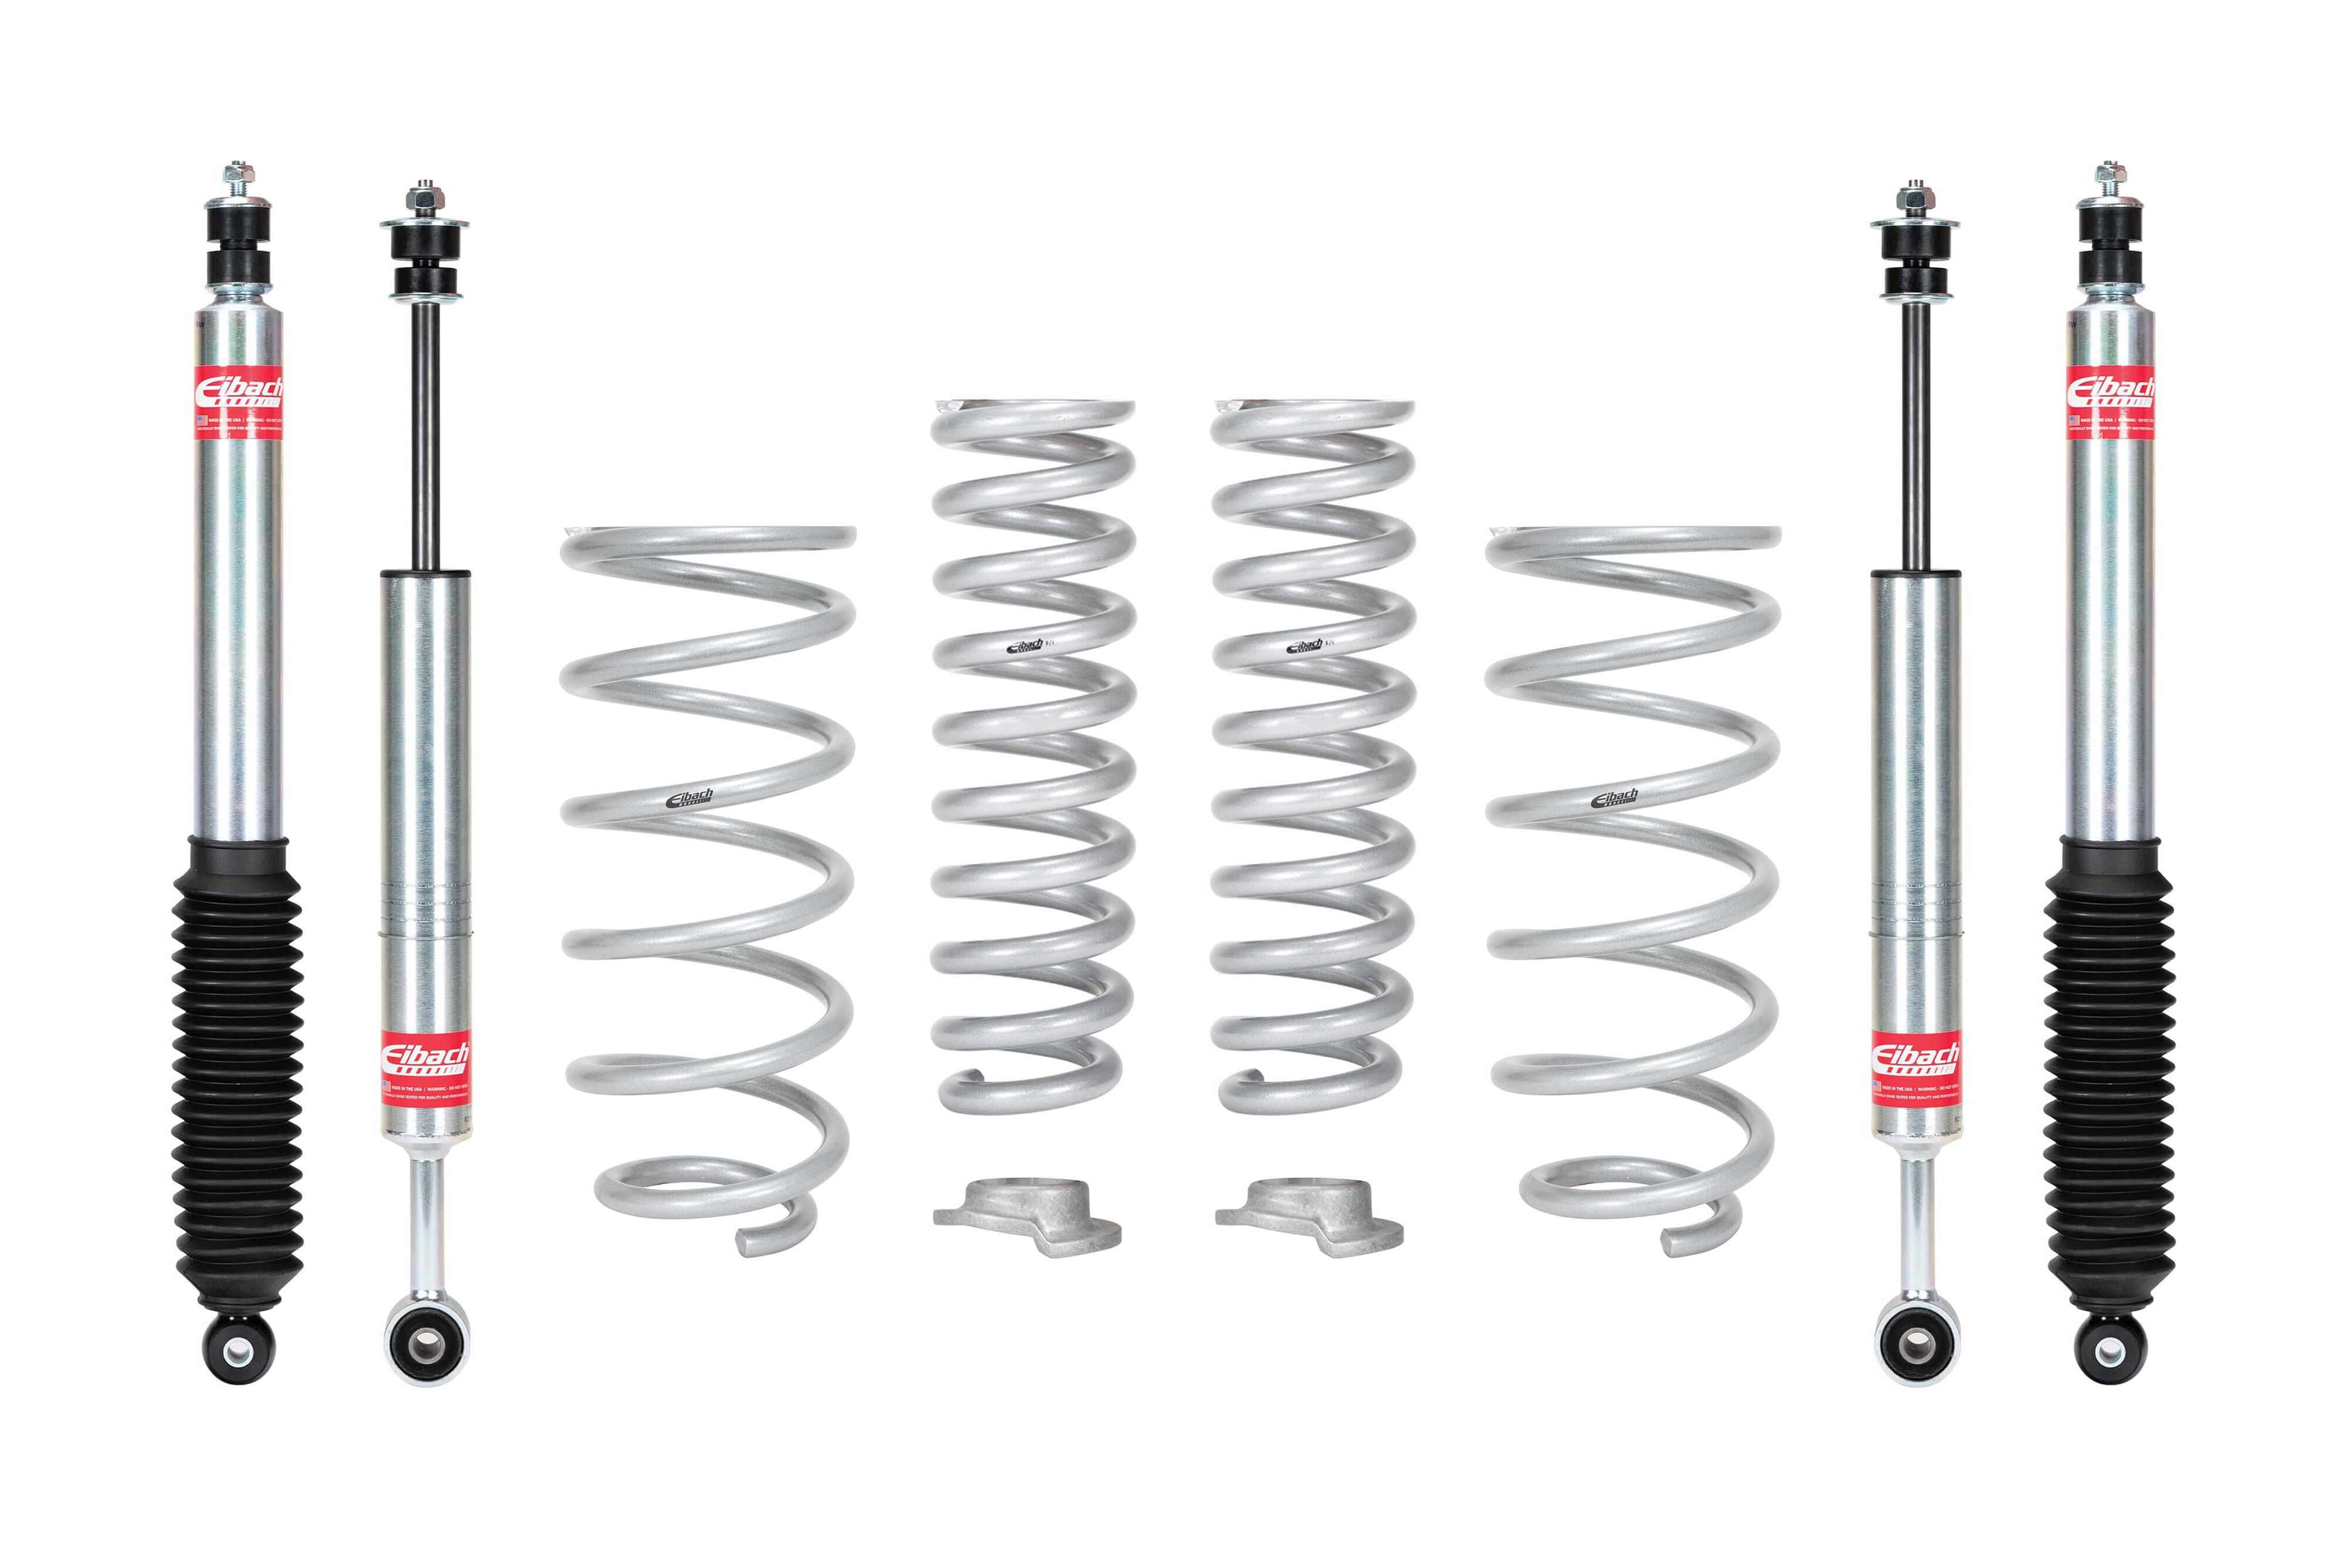 Eibach Pro-Truck-Lift Stage 1 kit with lift springs and sport shocks for increased tire clearance and improved performance